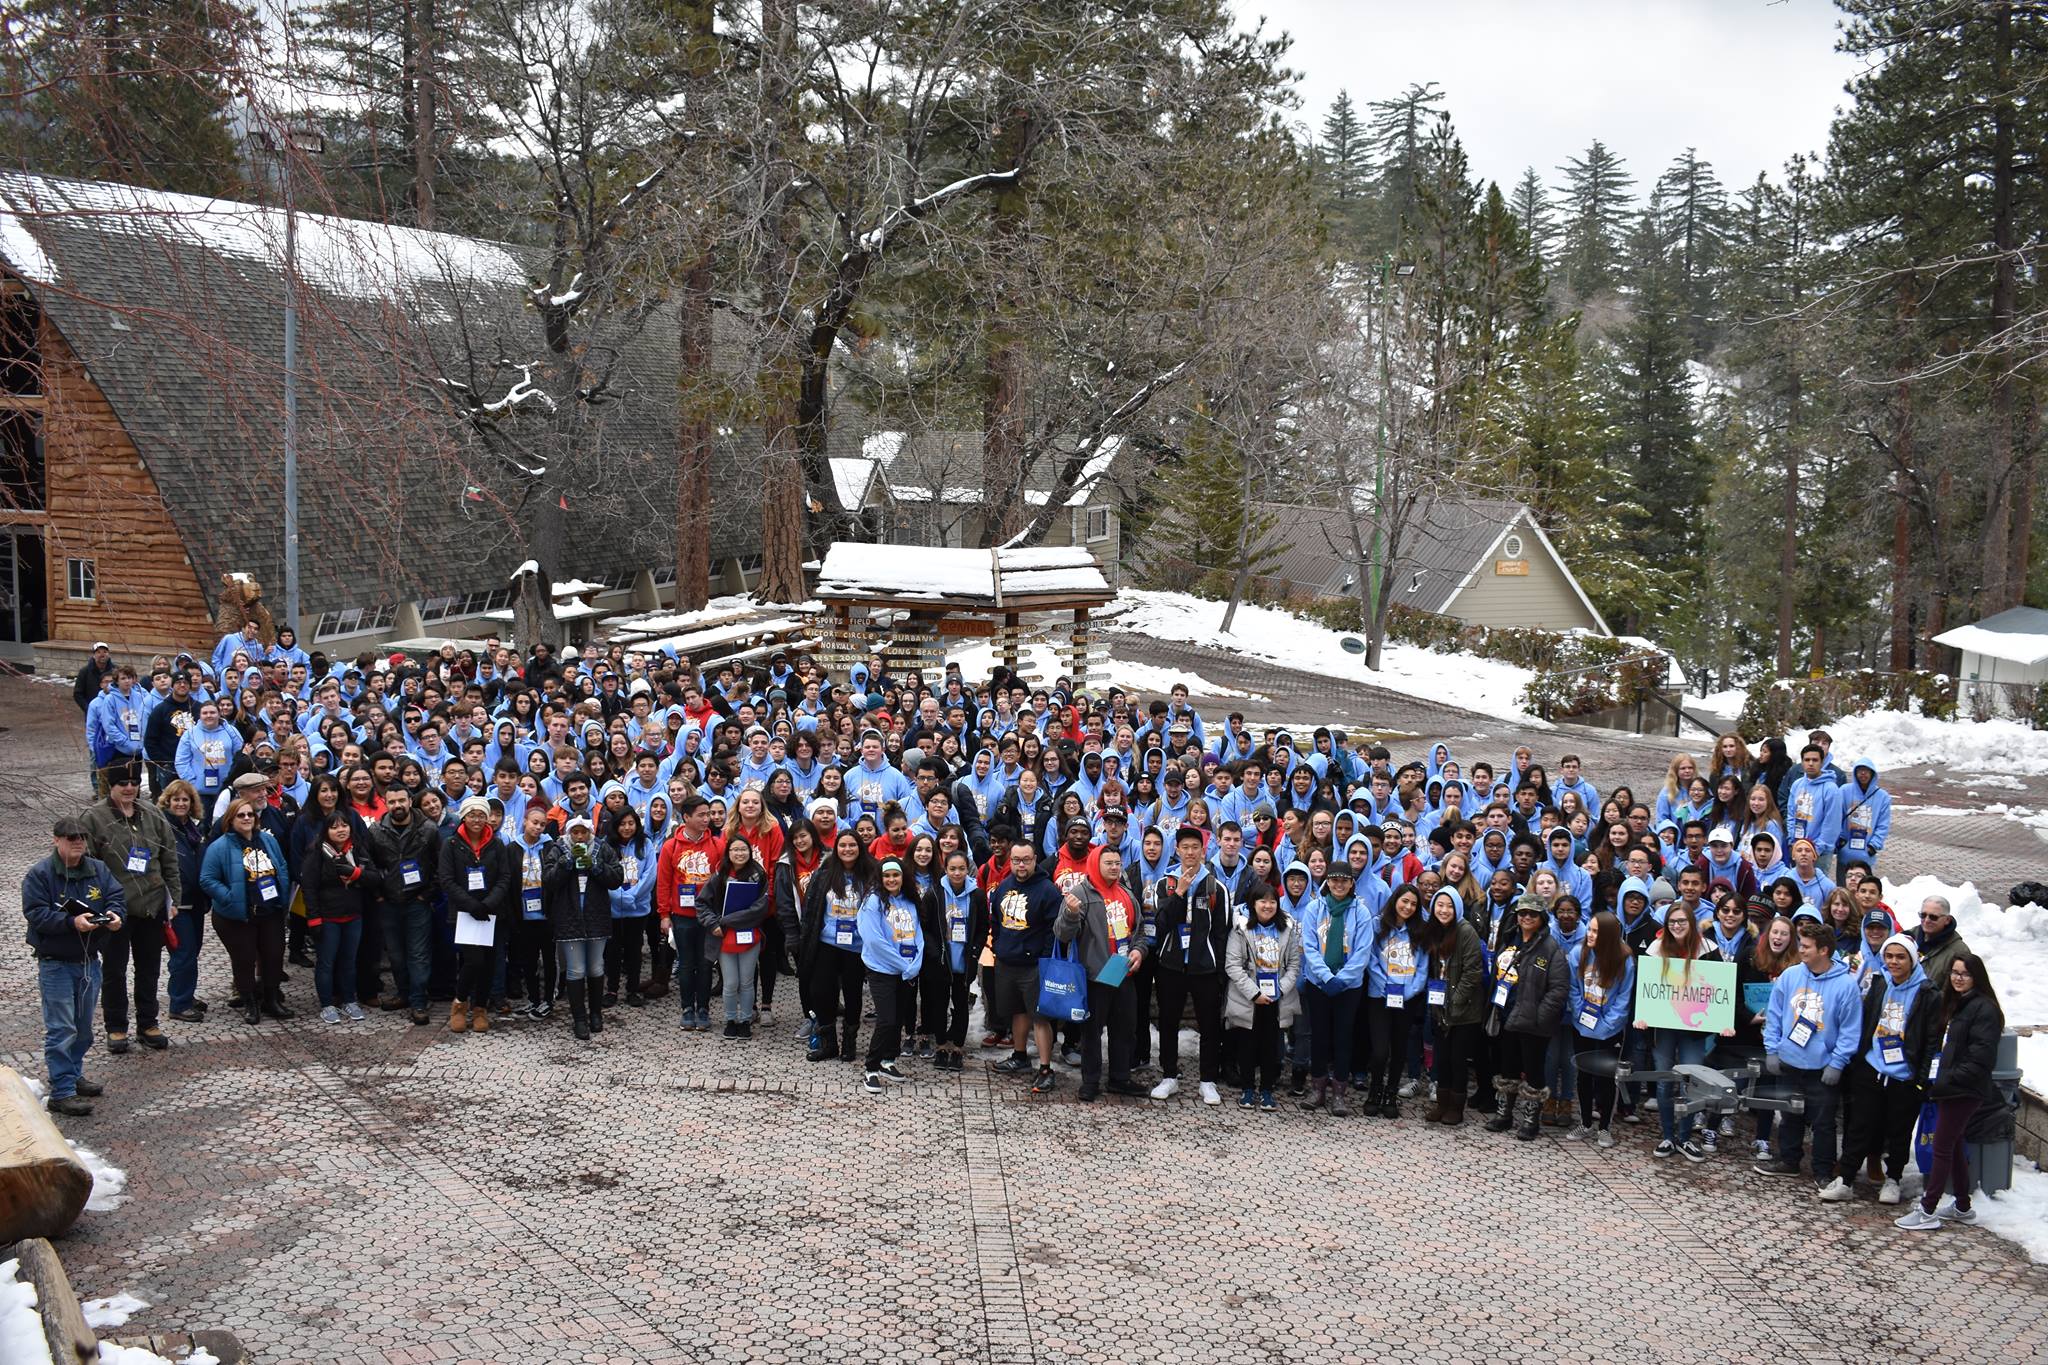 This year's Rotary Youth Leadership Awards saw more than 300 selected students from Southern California and Nevada attend Rotary International's intensive 3-day leadership training camp.